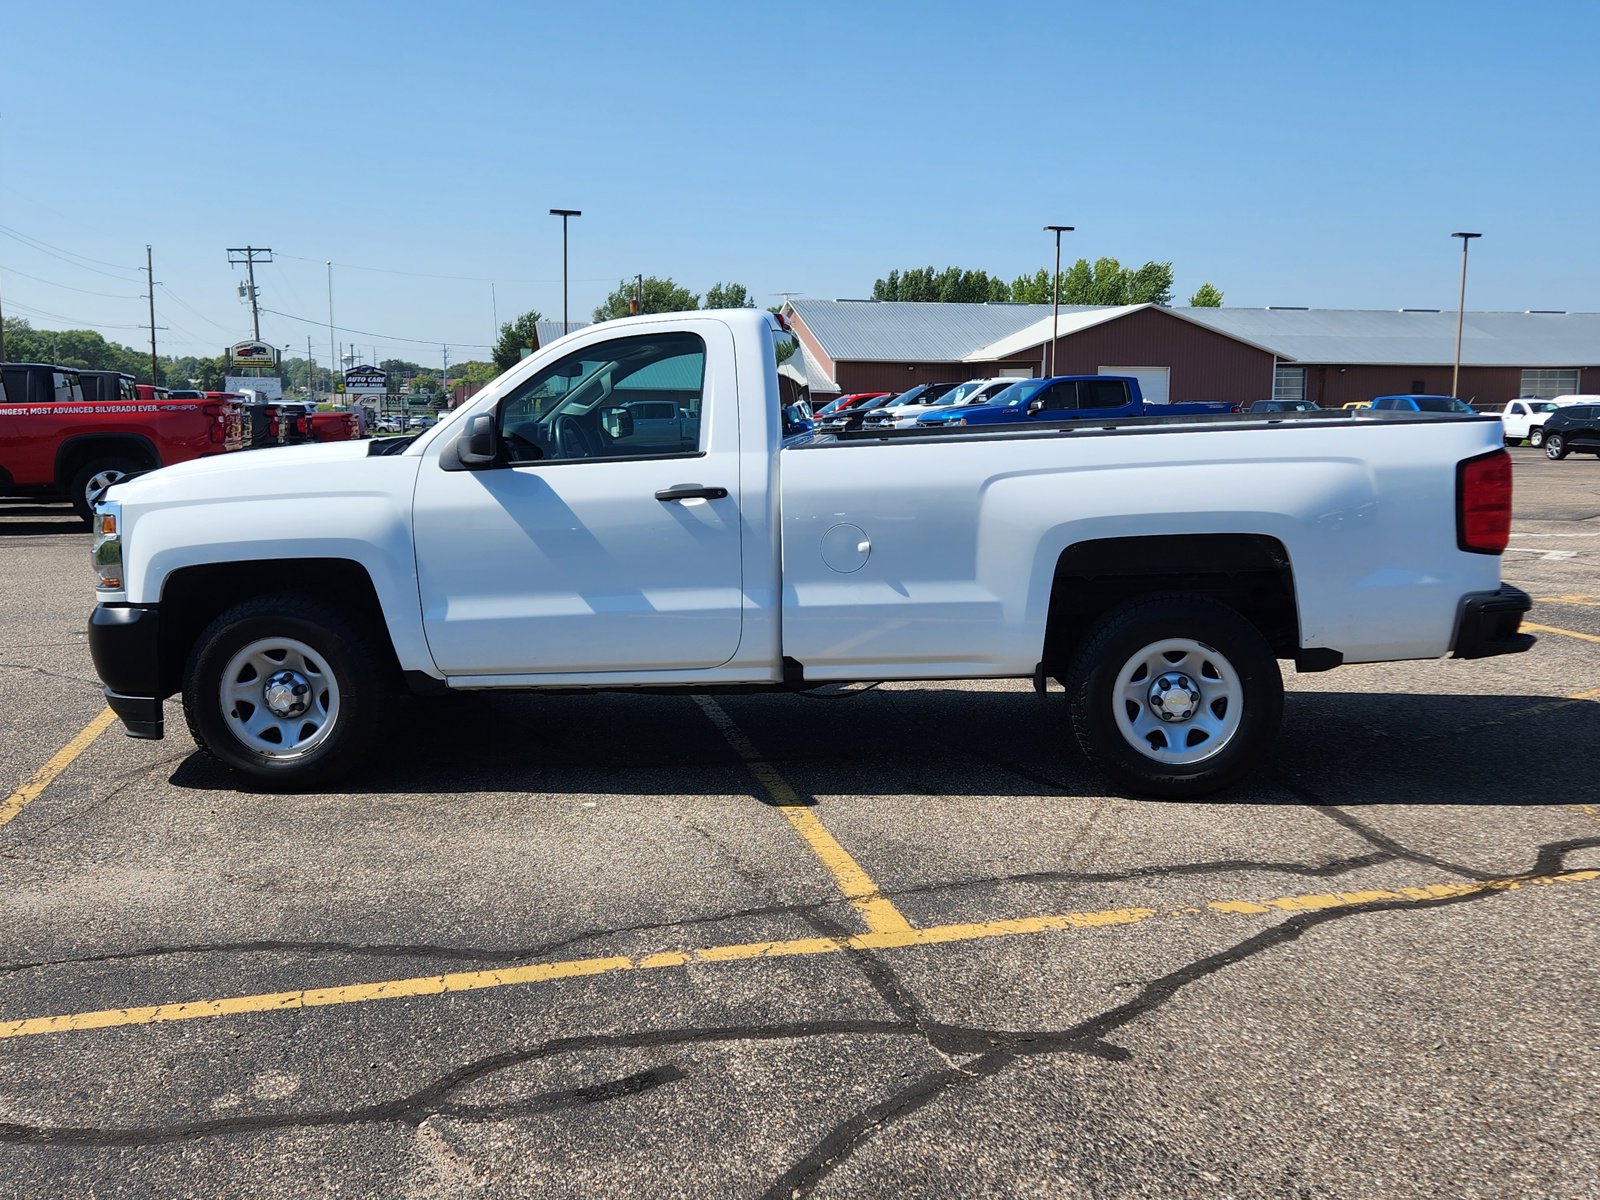 Used 2018 Chevrolet Silverado 1500 Work Truck 1WT with VIN 1GCNCNEH5JZ200118 for sale in Annandale, Minnesota